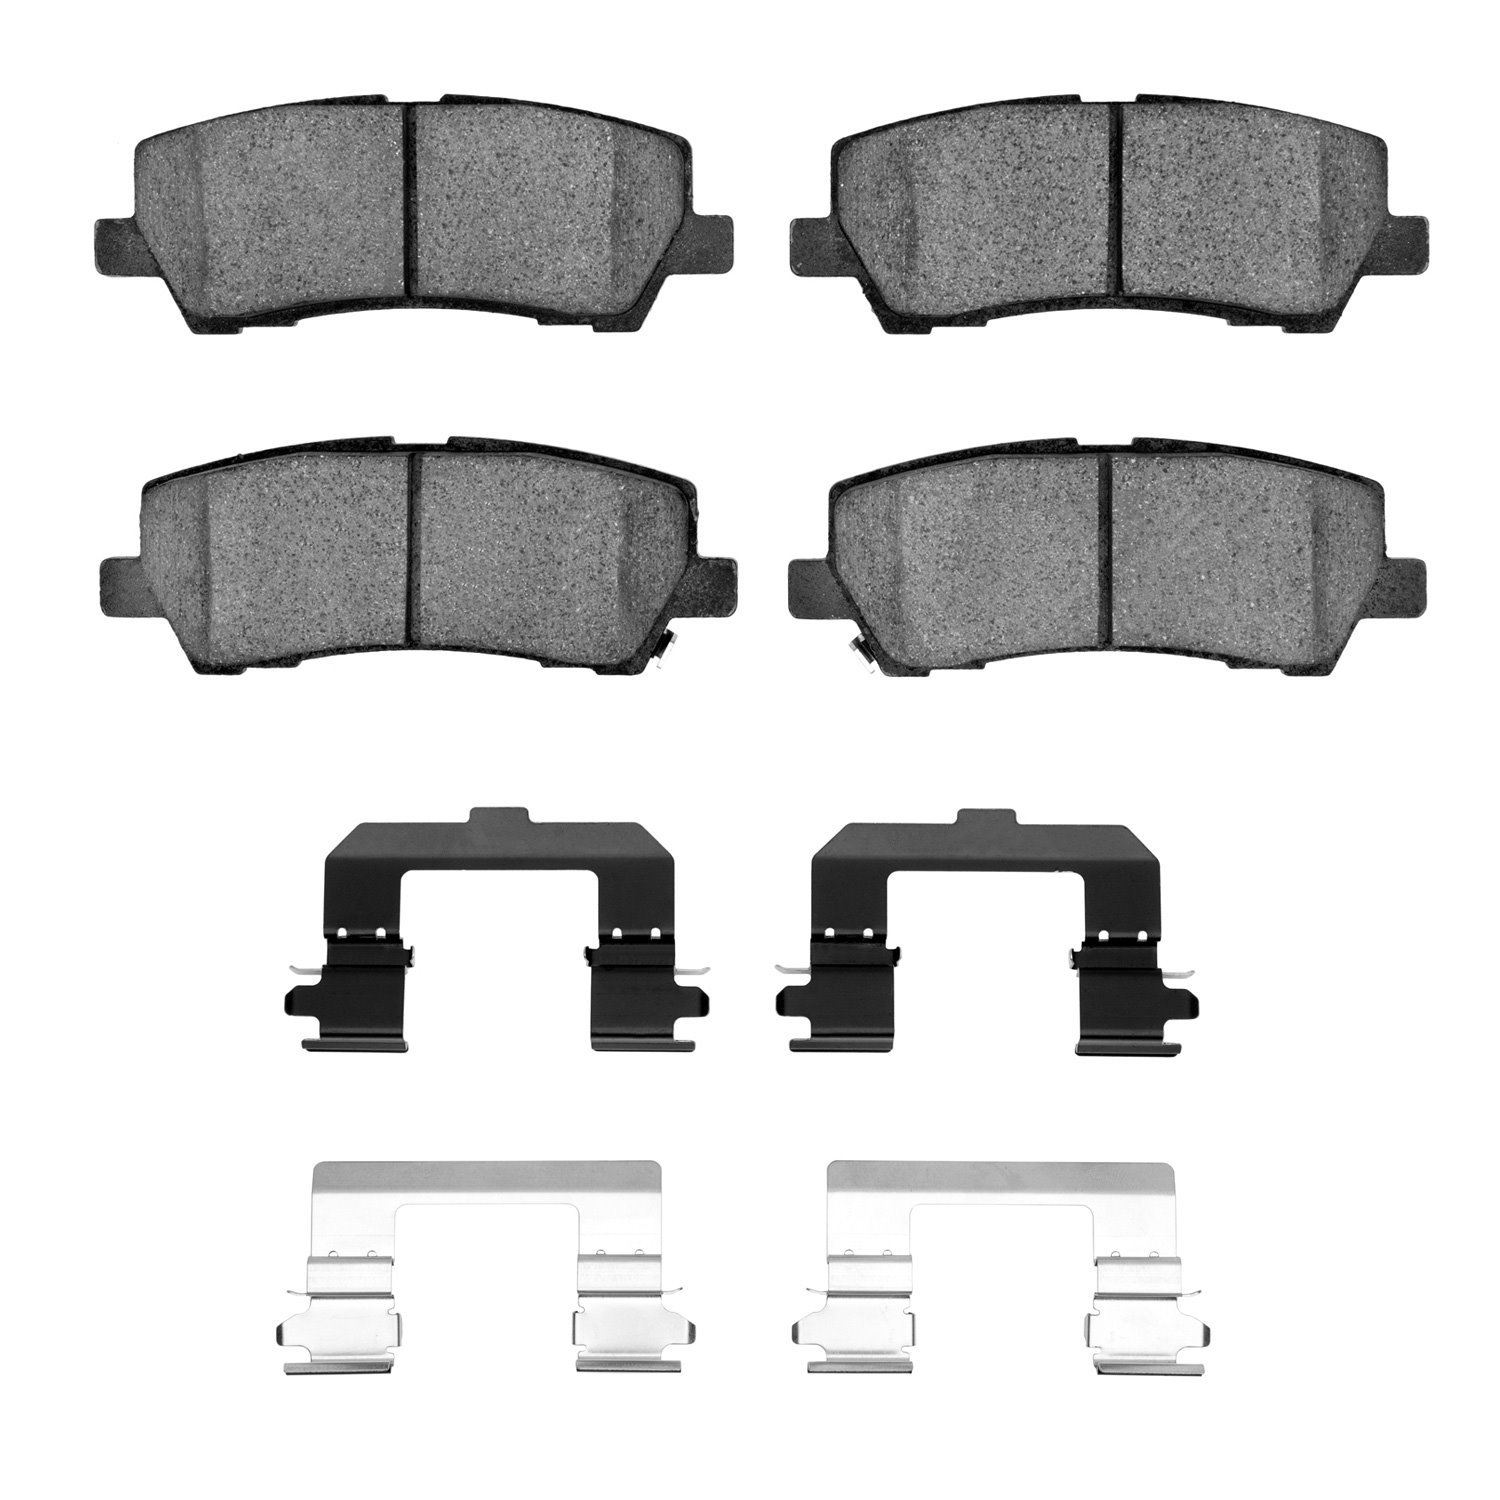 1214-1793-02 Heavy-Duty Brake Pads & Hardware Kit, Fits Select Ford/Lincoln/Mercury/Mazda, Position: Rear